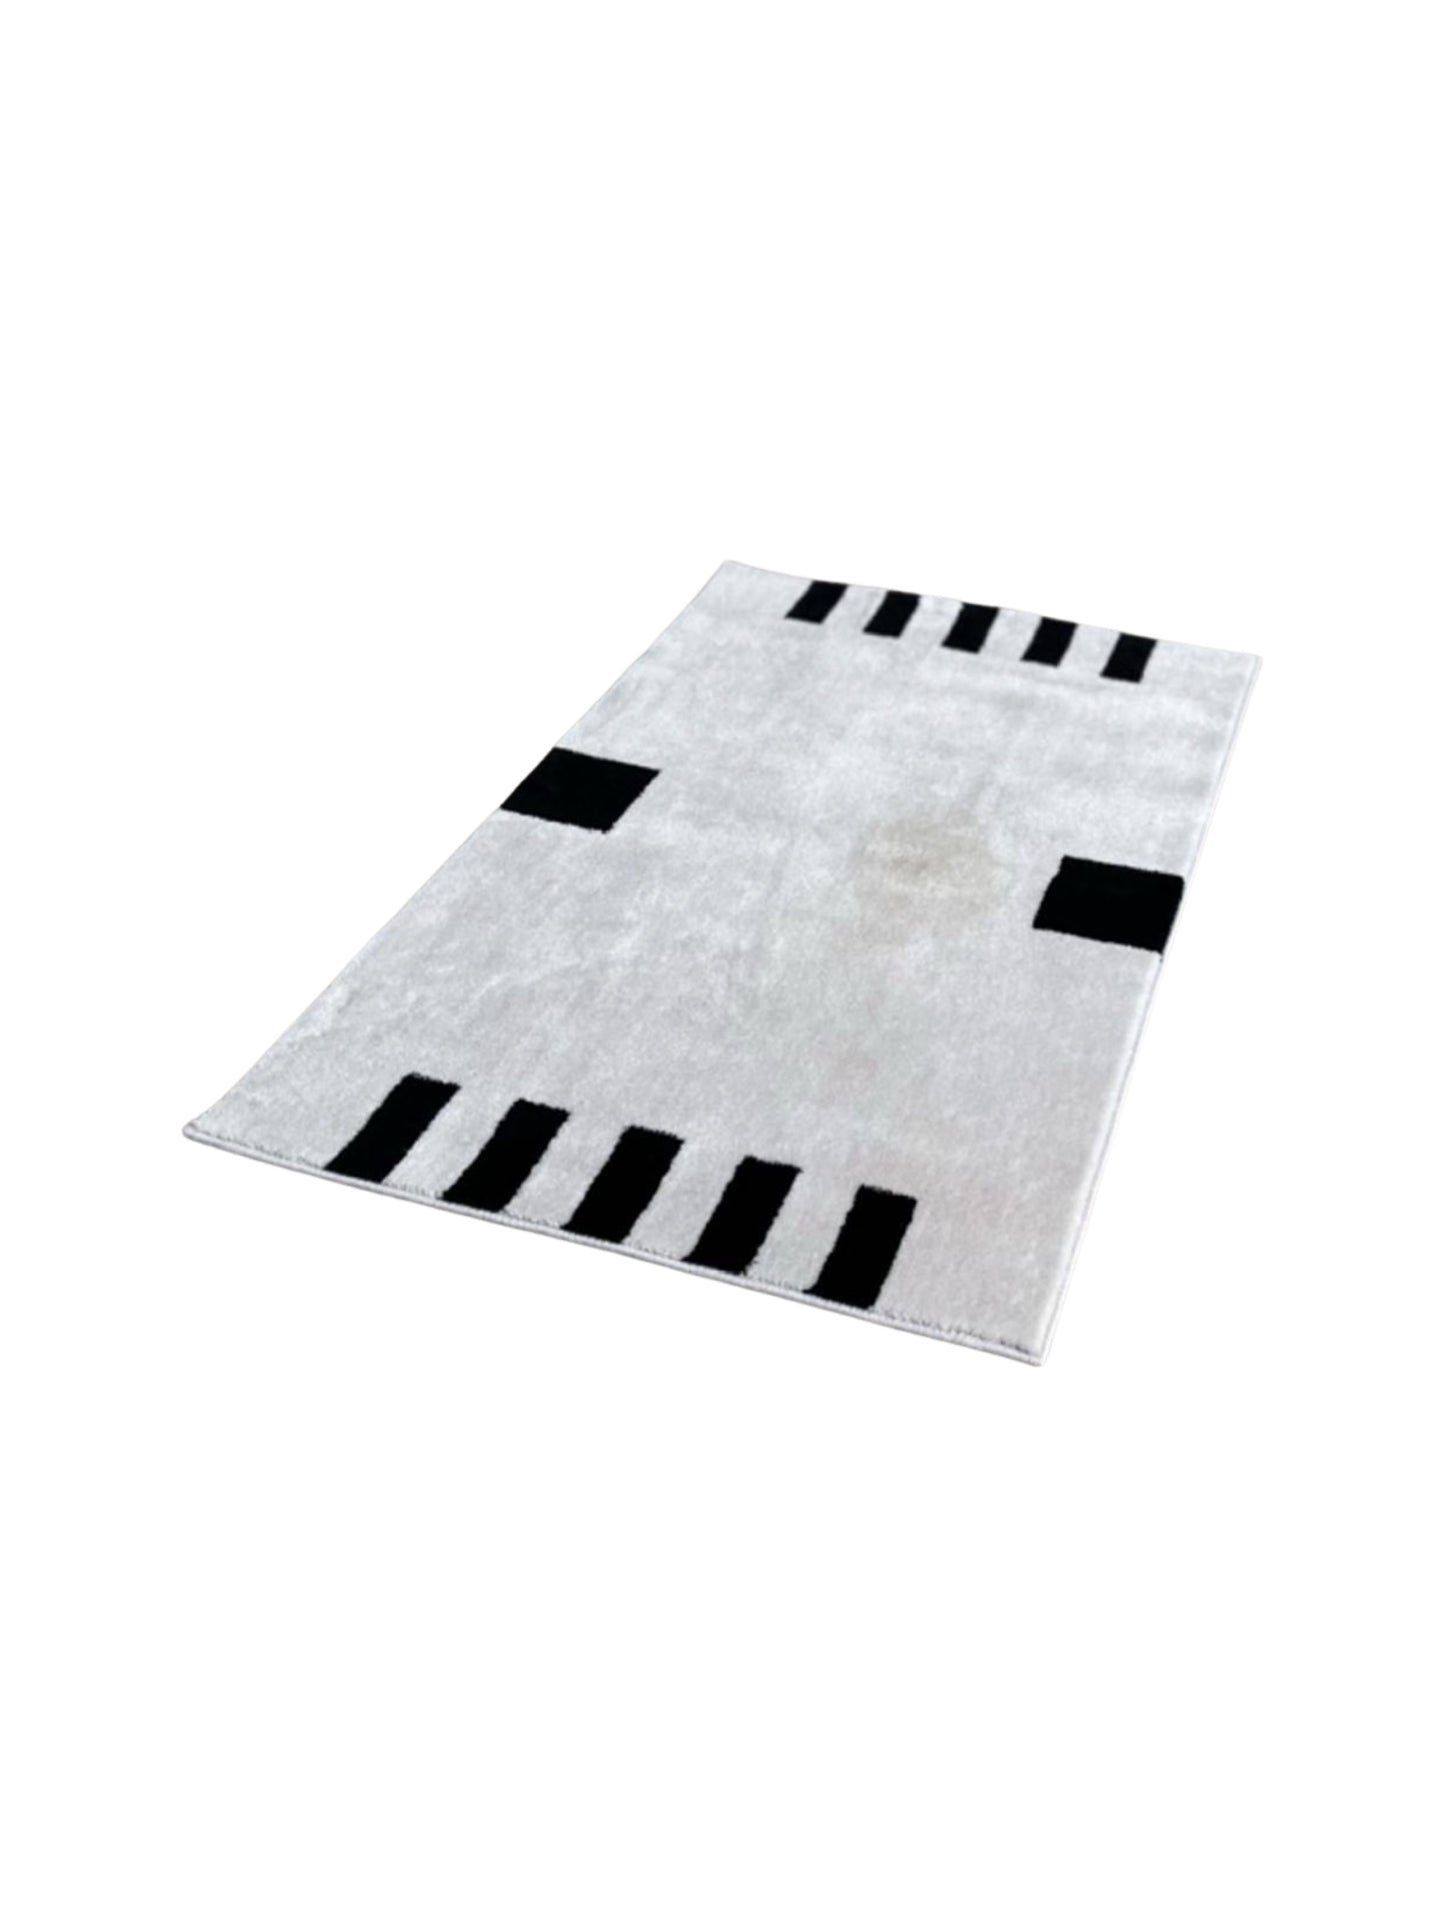 Tros by Dieter Sieger for Gebhan Edition Geometric Designed Cotton White and Black Rug, 1990